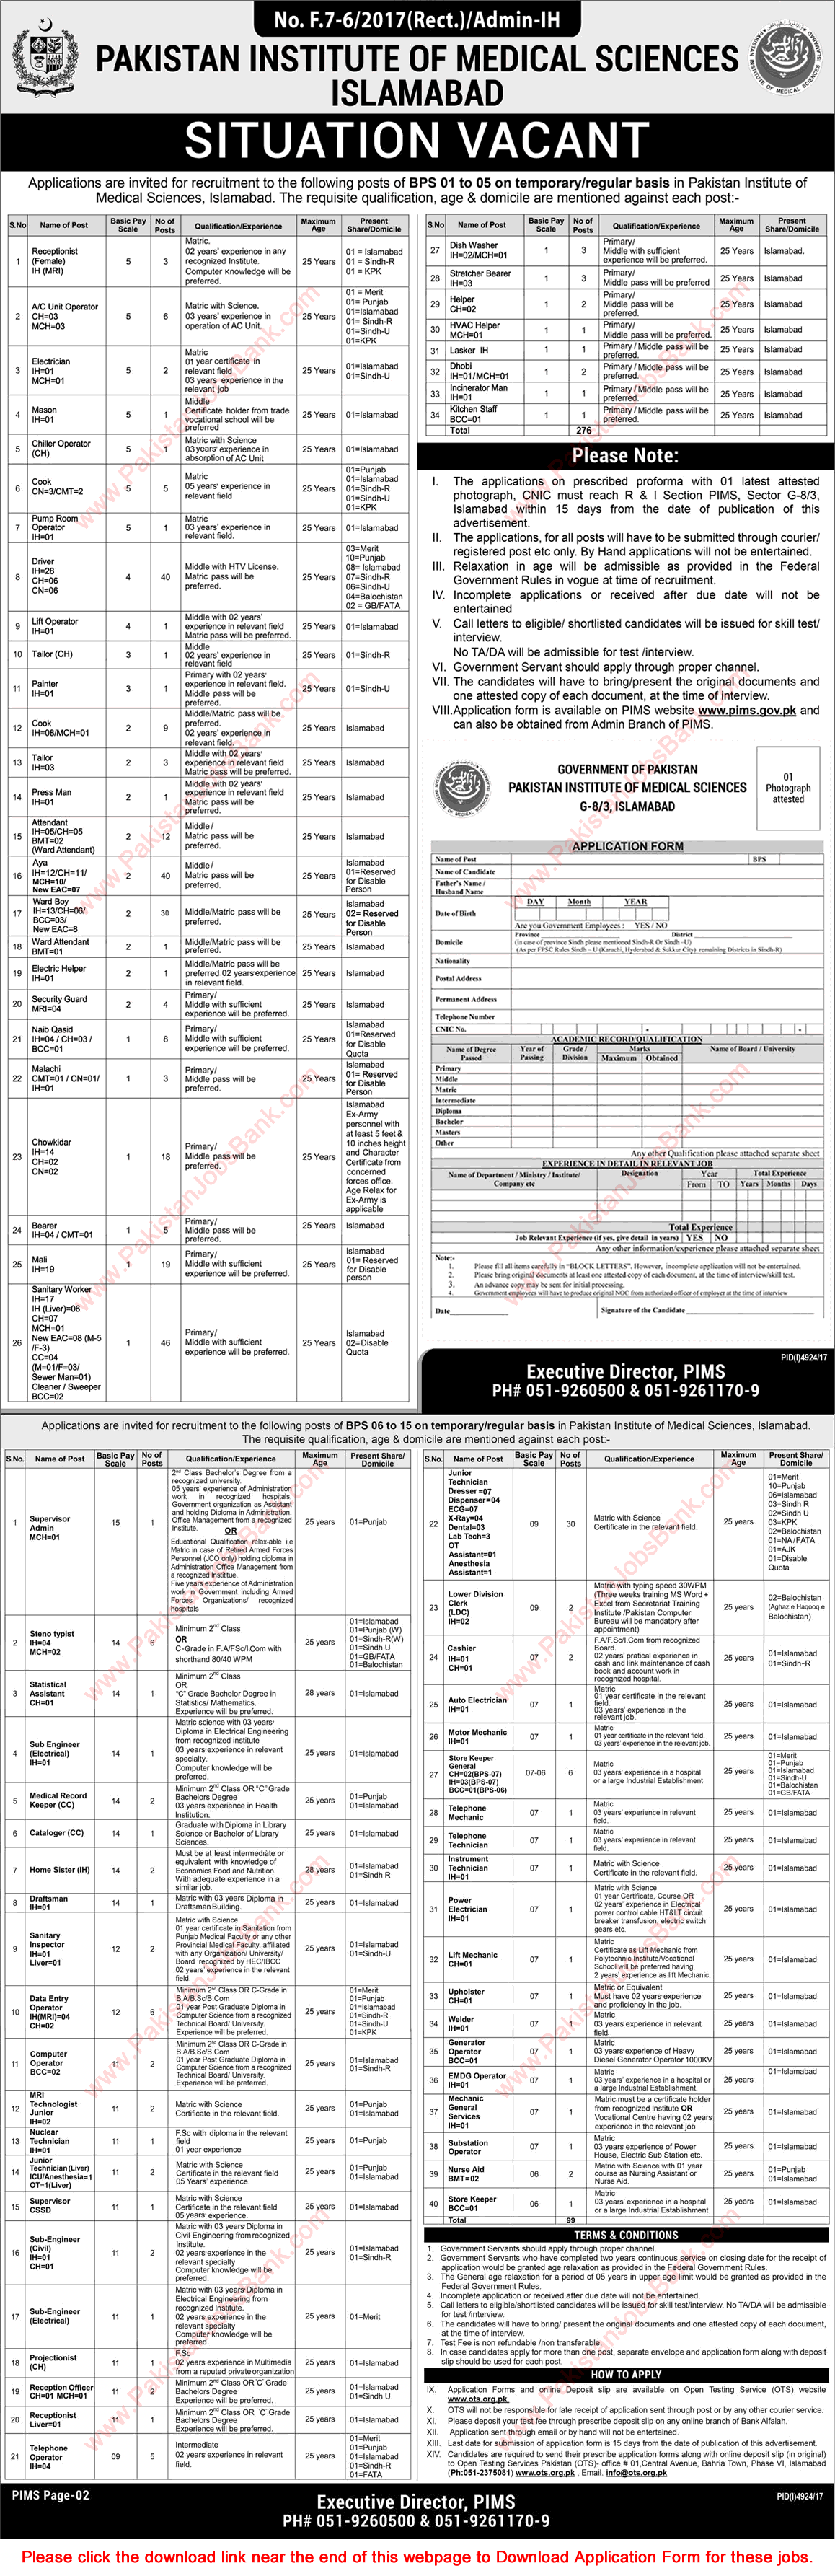 PIMS Islamabad Jobs 2018 March Application Form Pakistan Institute of Medical Sciences Latest